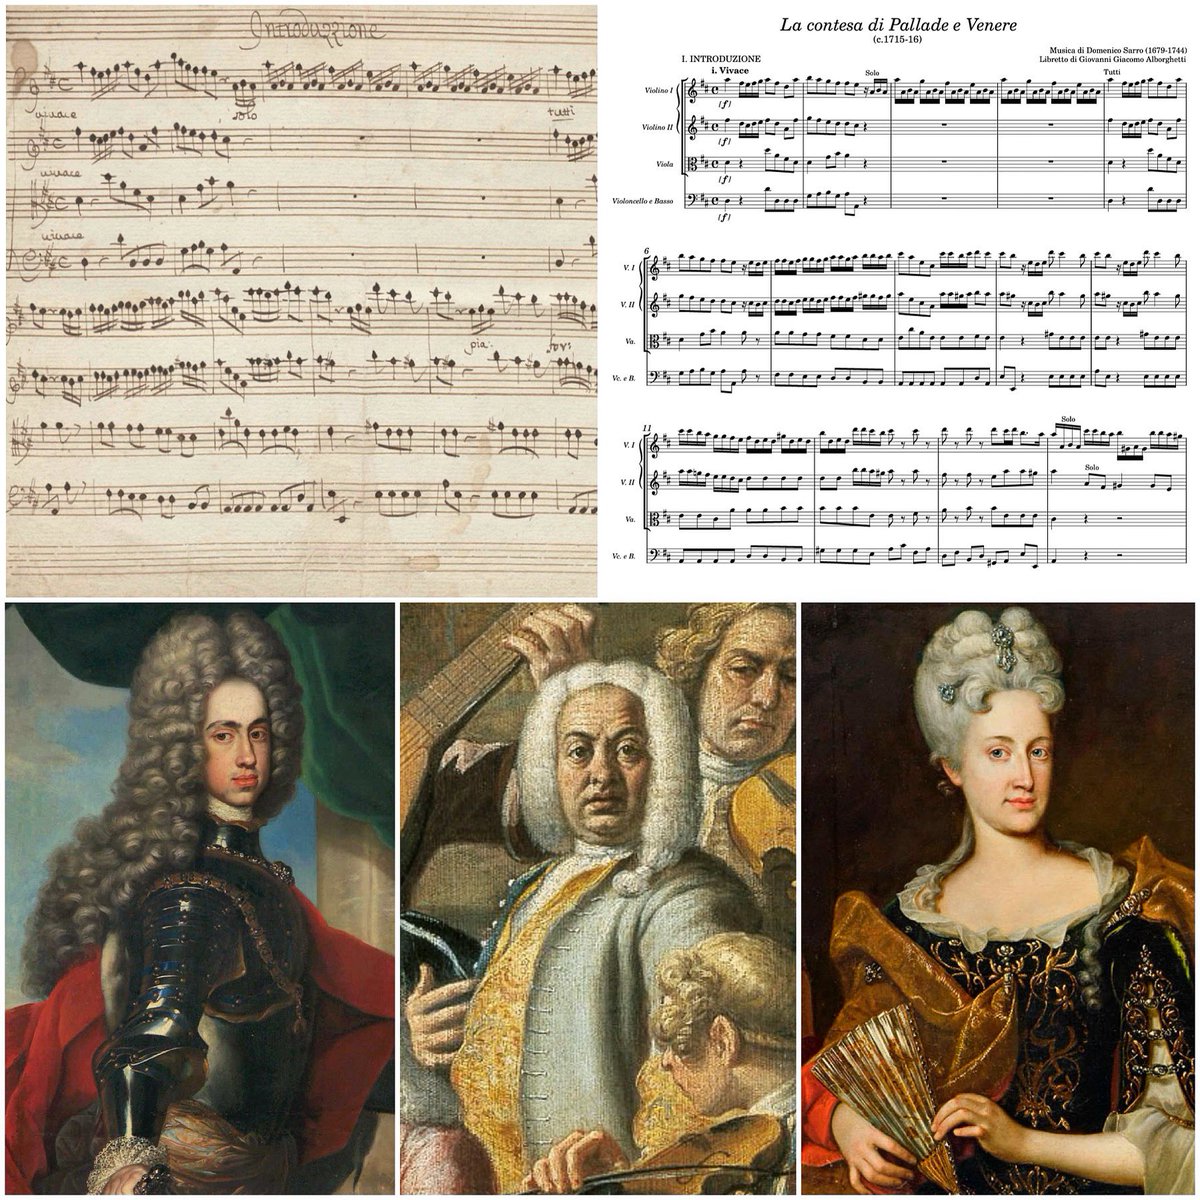 Join us on Thu 28/9 19.30 BST at @sandsfilmscine (online/in person) for Sarro’s 1715-16 #opera ‘The Quarrel 'twixt Minerva & Venus’ – not performed for over 300 years – digitised from the @bsb_muenchen manuscript by our Founder & @QueerGeorgians AD & Co-Founder @ianpeterb! #Queer